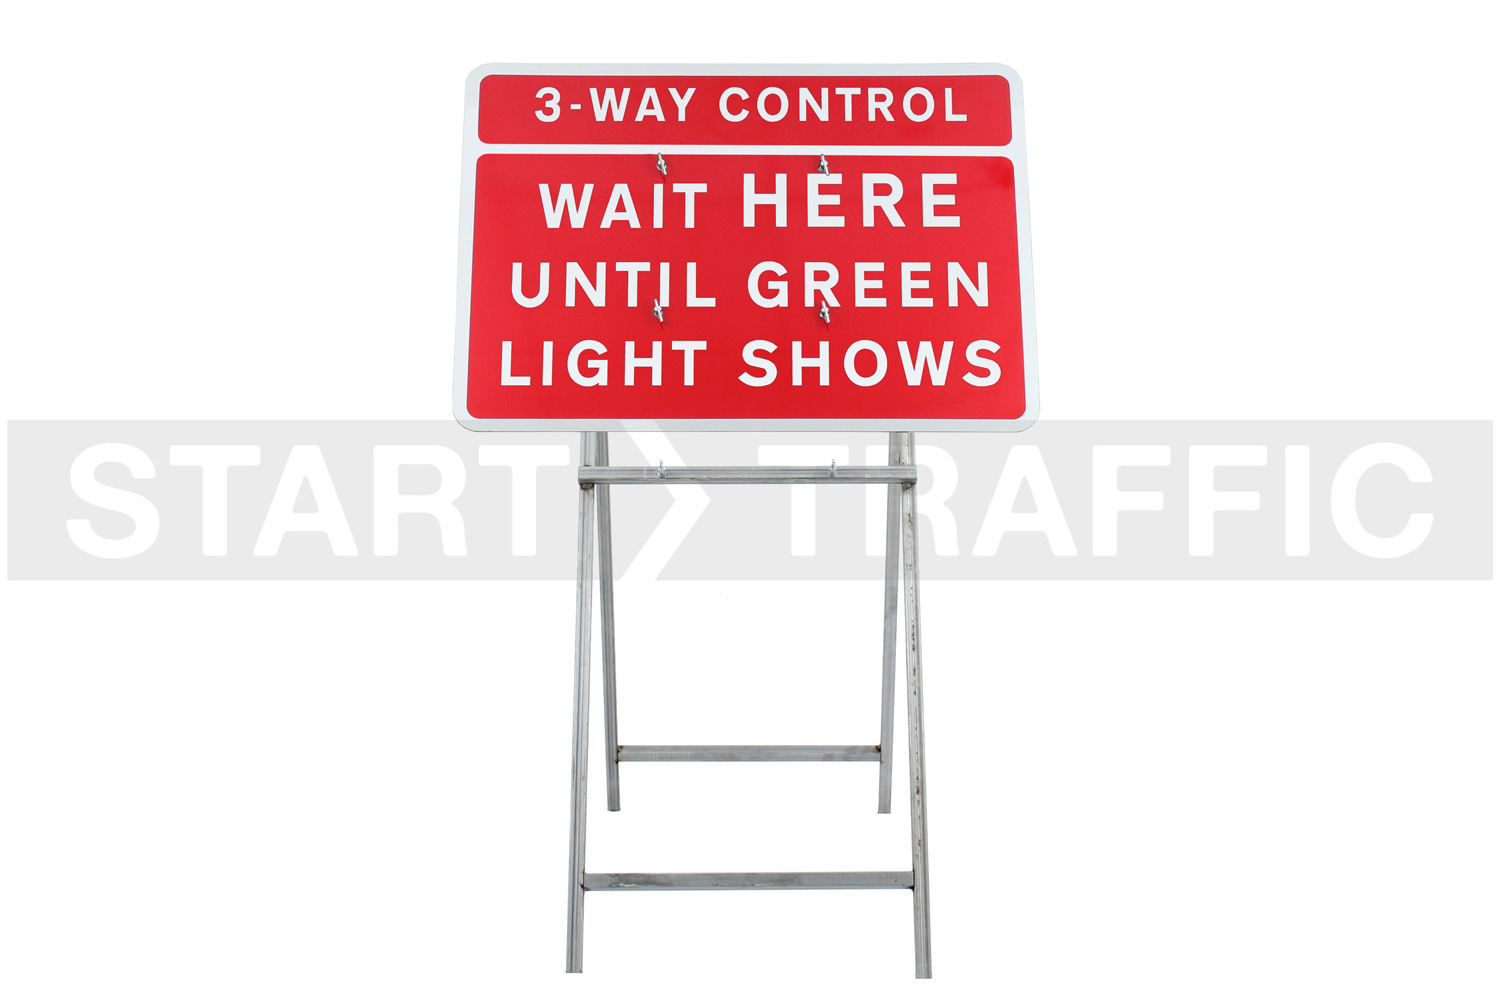 4-way Control Wait HERE Until Green Light Shows Sign Mounted on Quick-Fit Mini Frame